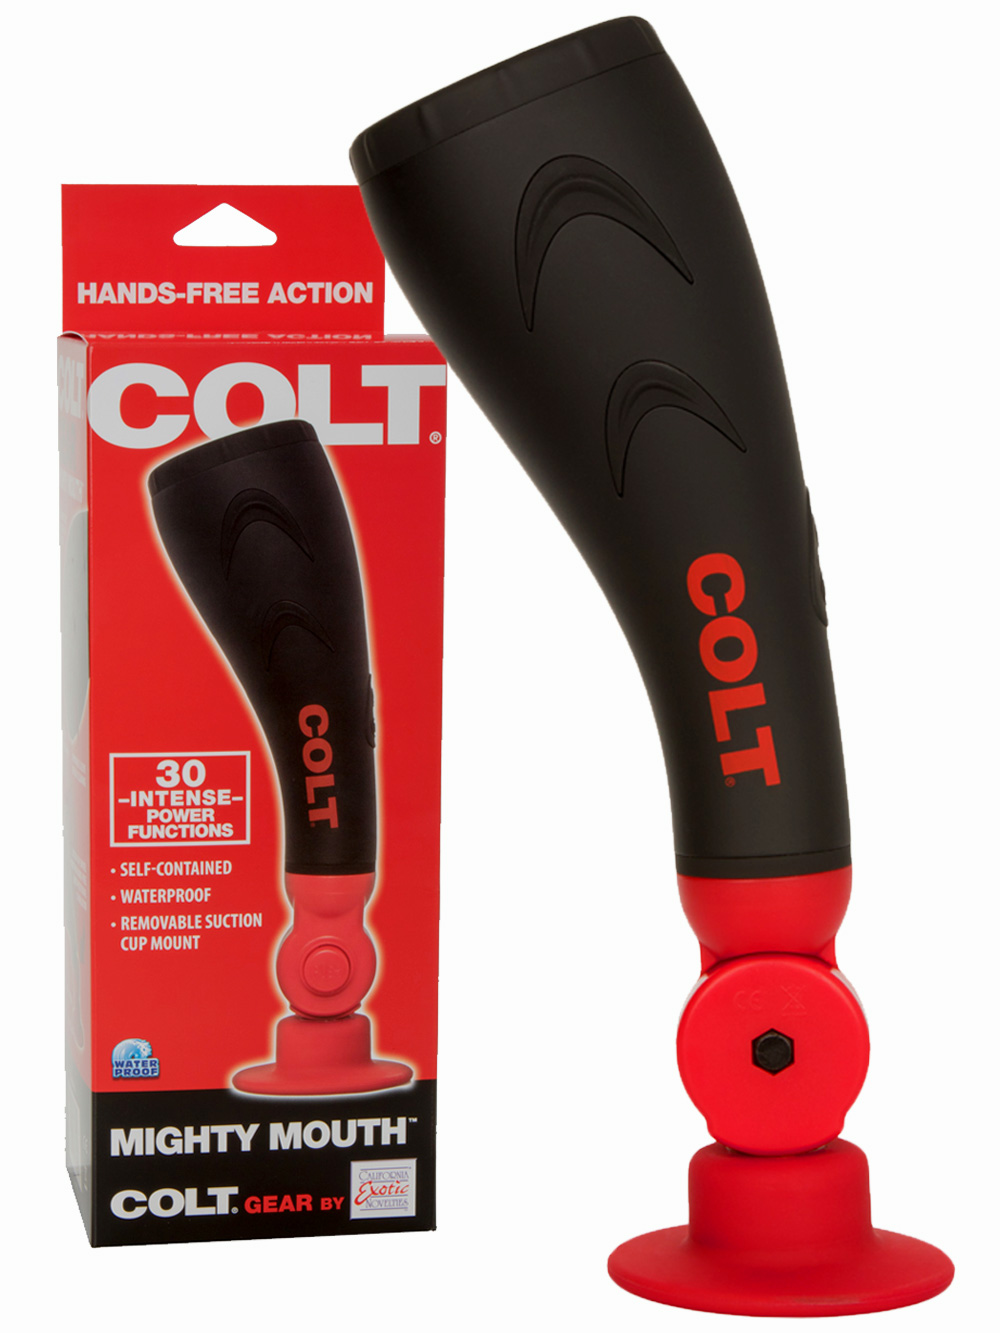 COLT Mighty Mouth